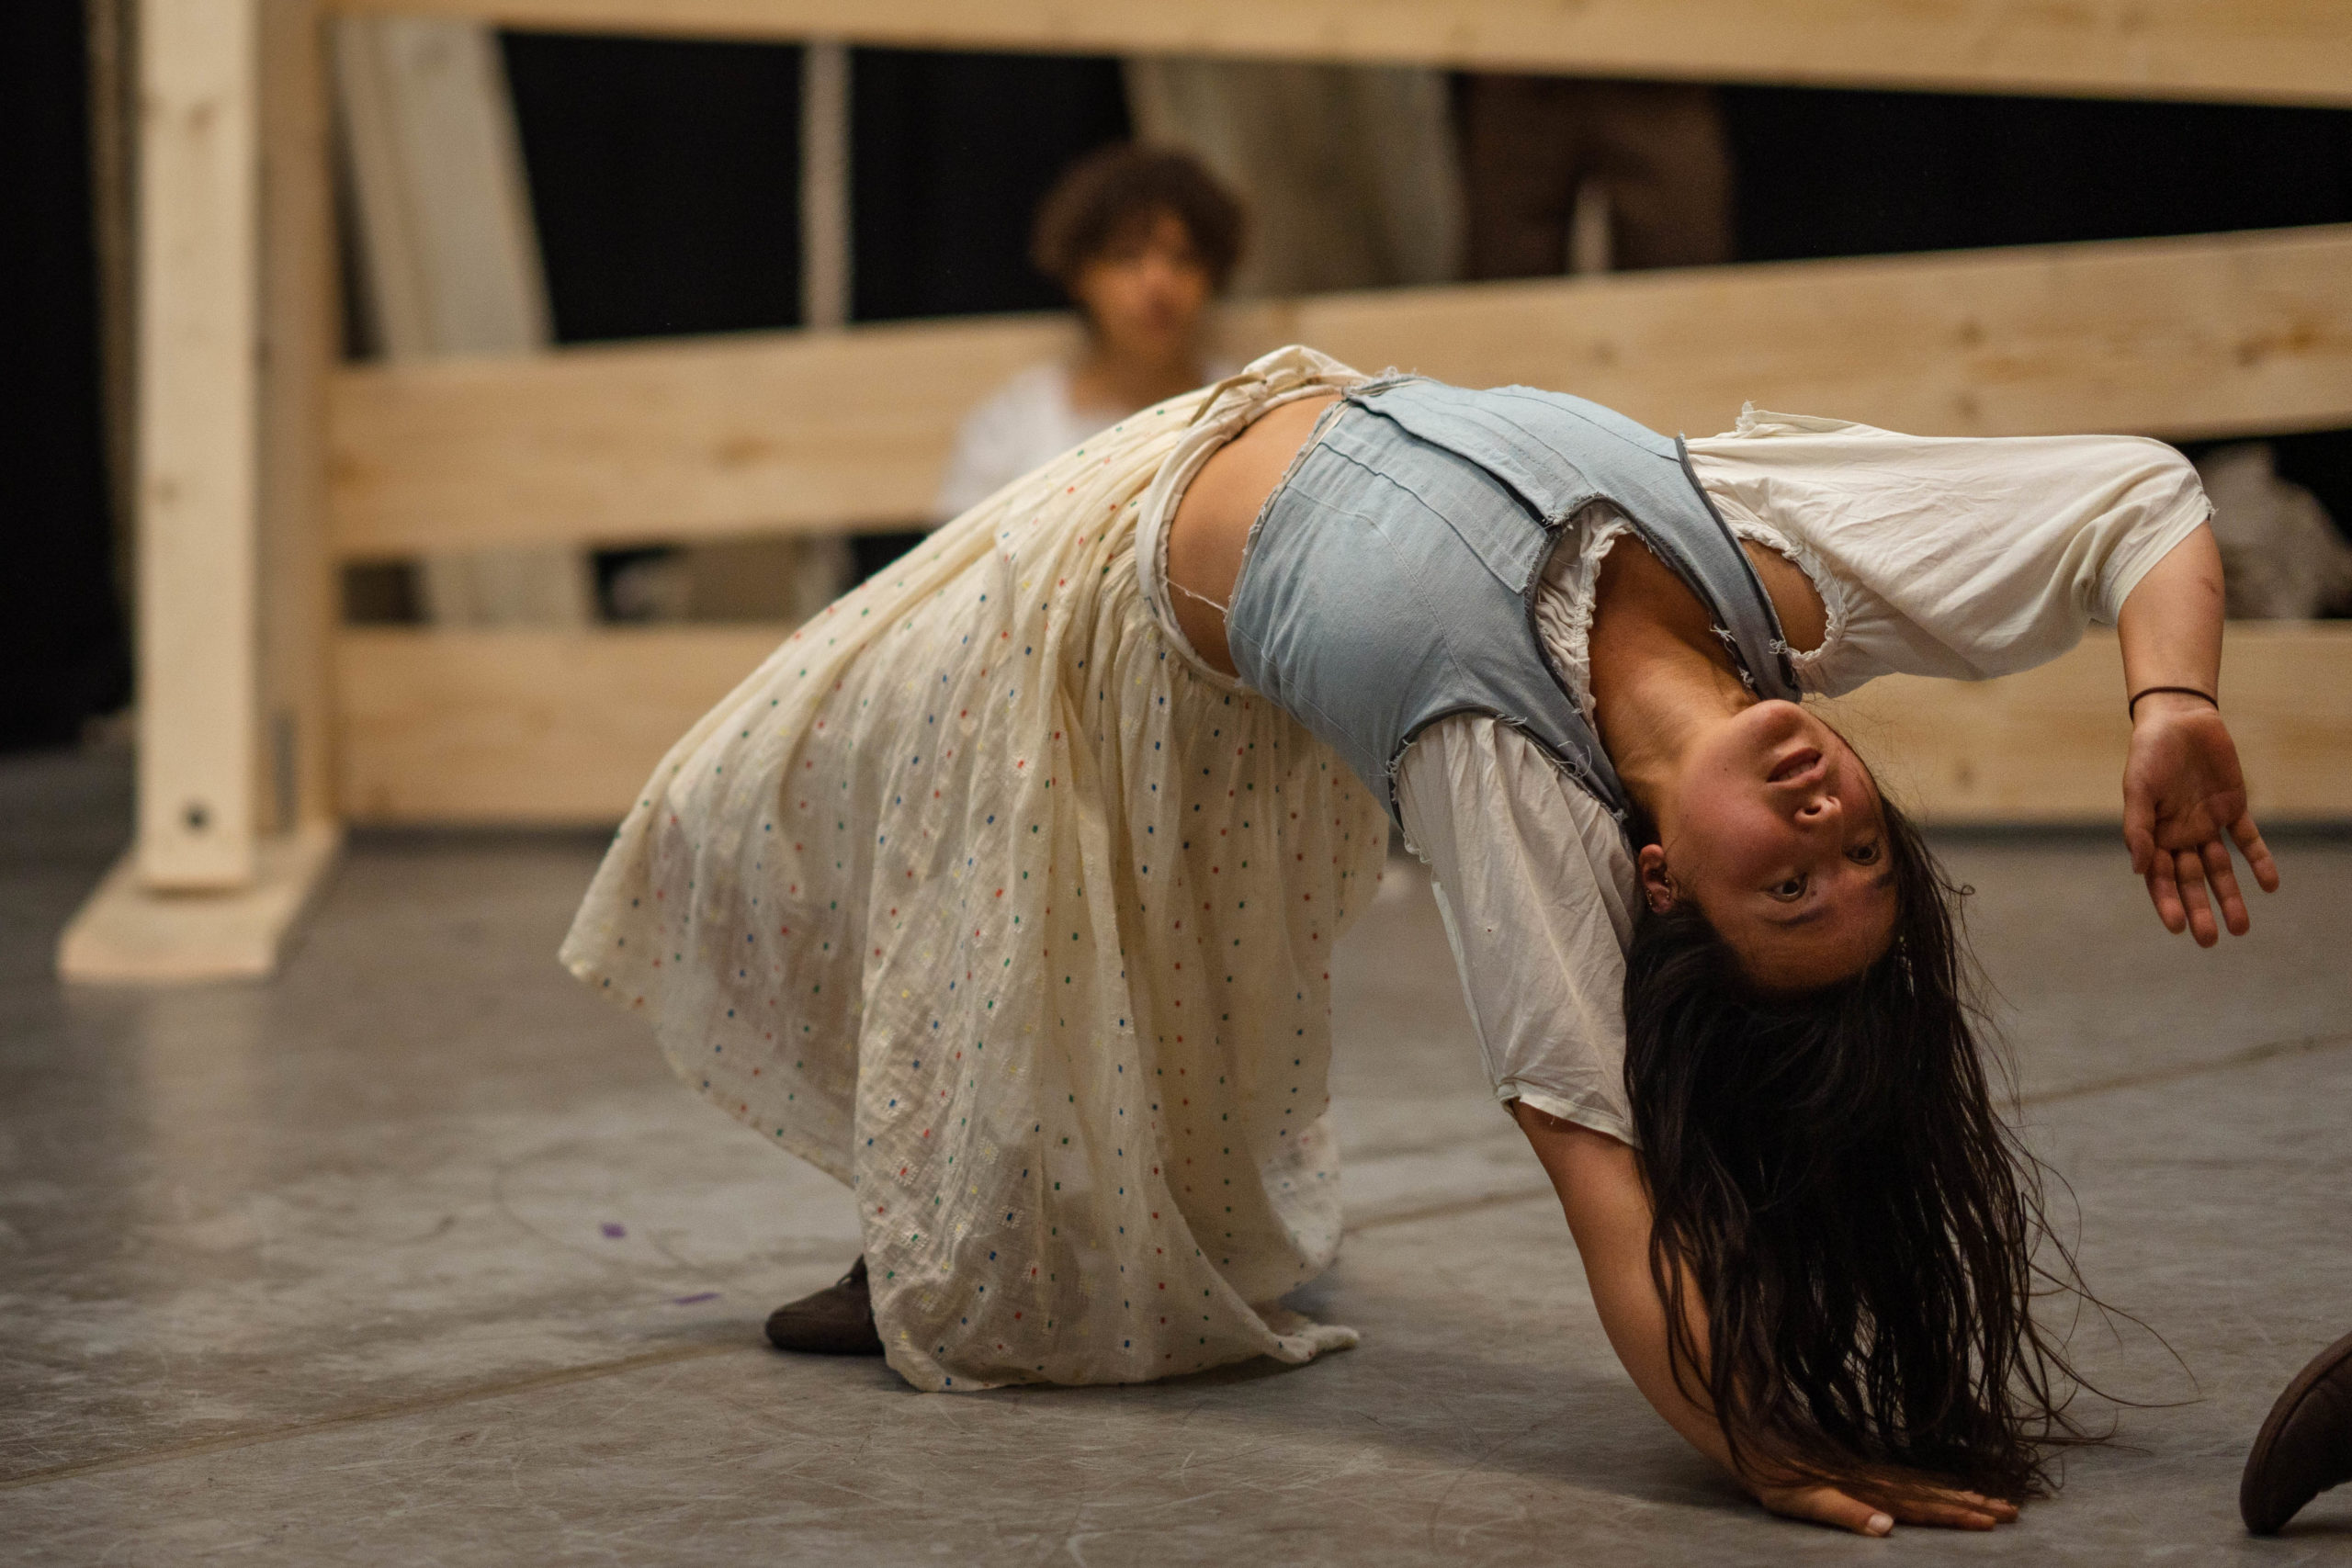 Rehearsal photography for a circus show. A performer exhibits a backbend. She has long dark hair and a flowing skirt.